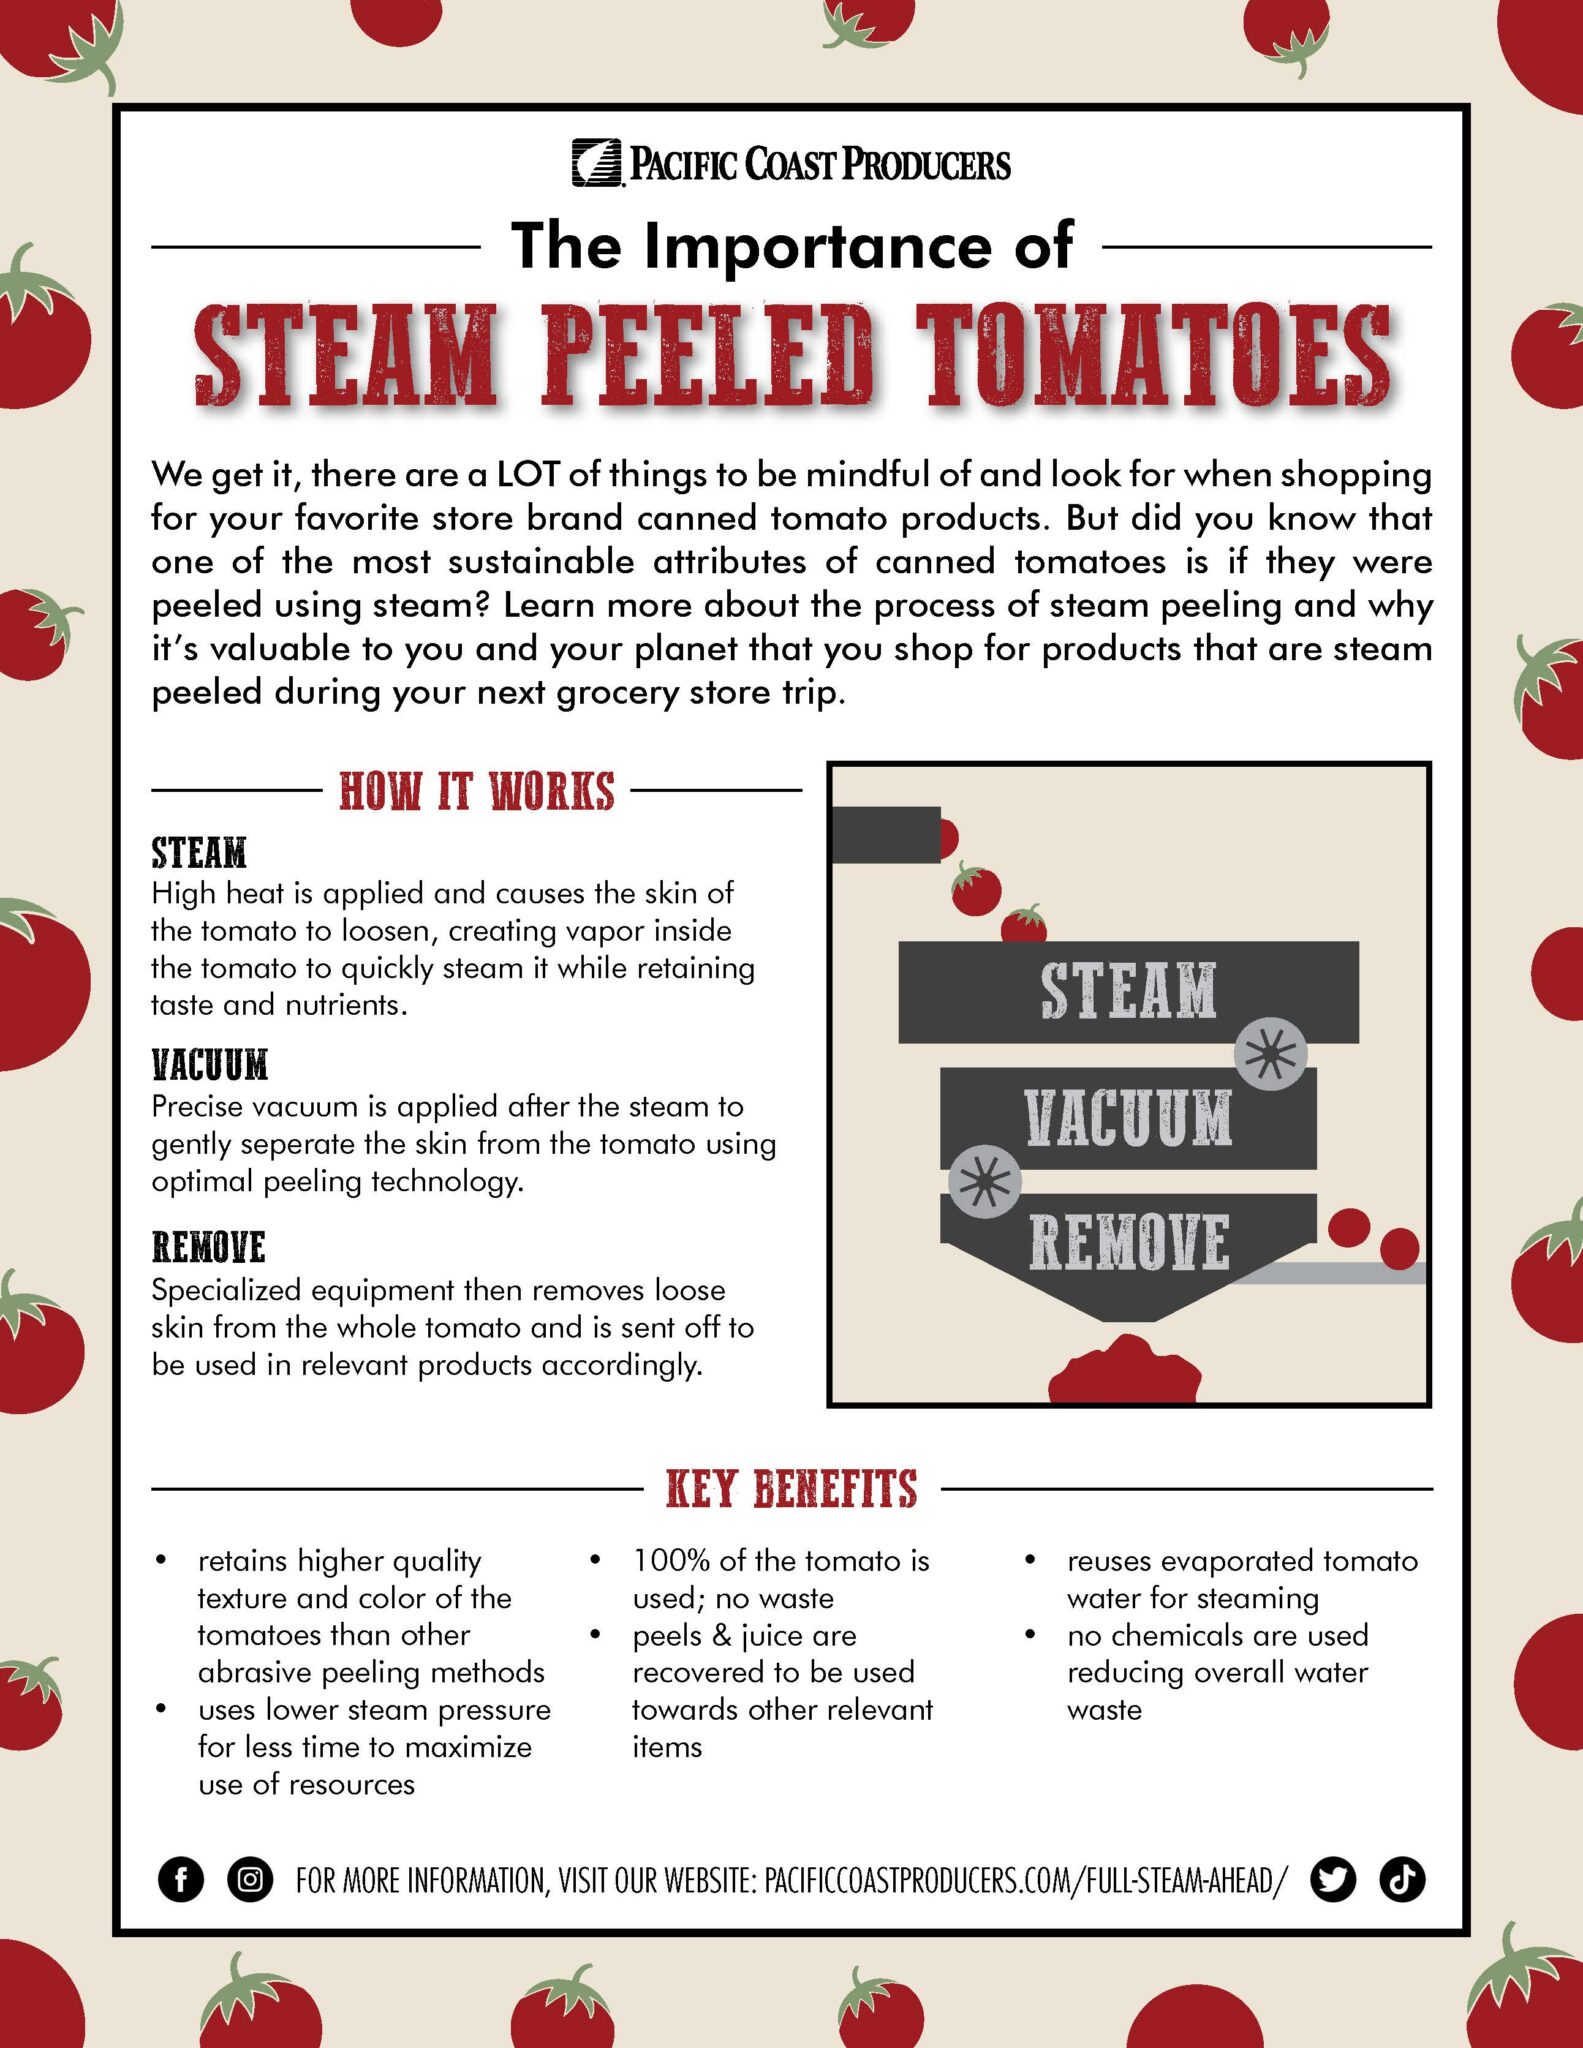 Unveiling the significance of steam peeled tomatoes.